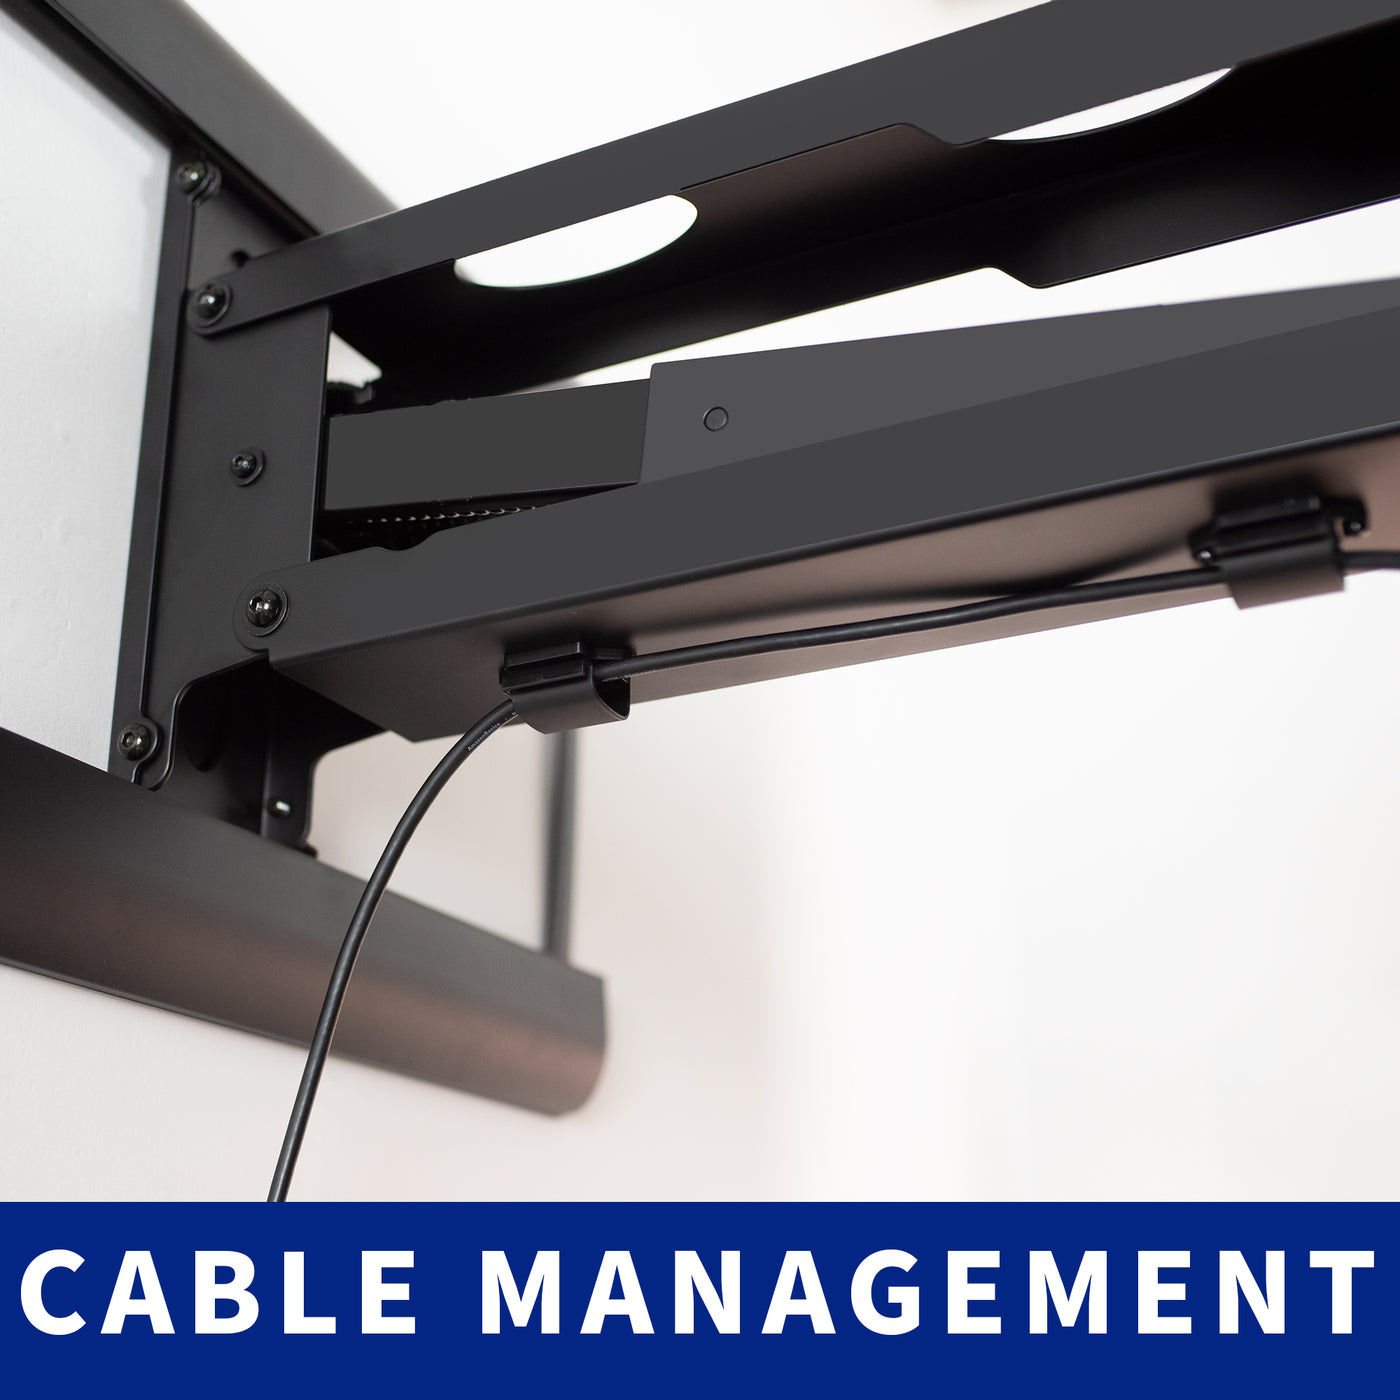 Built-in cable management for a sleek clean look.